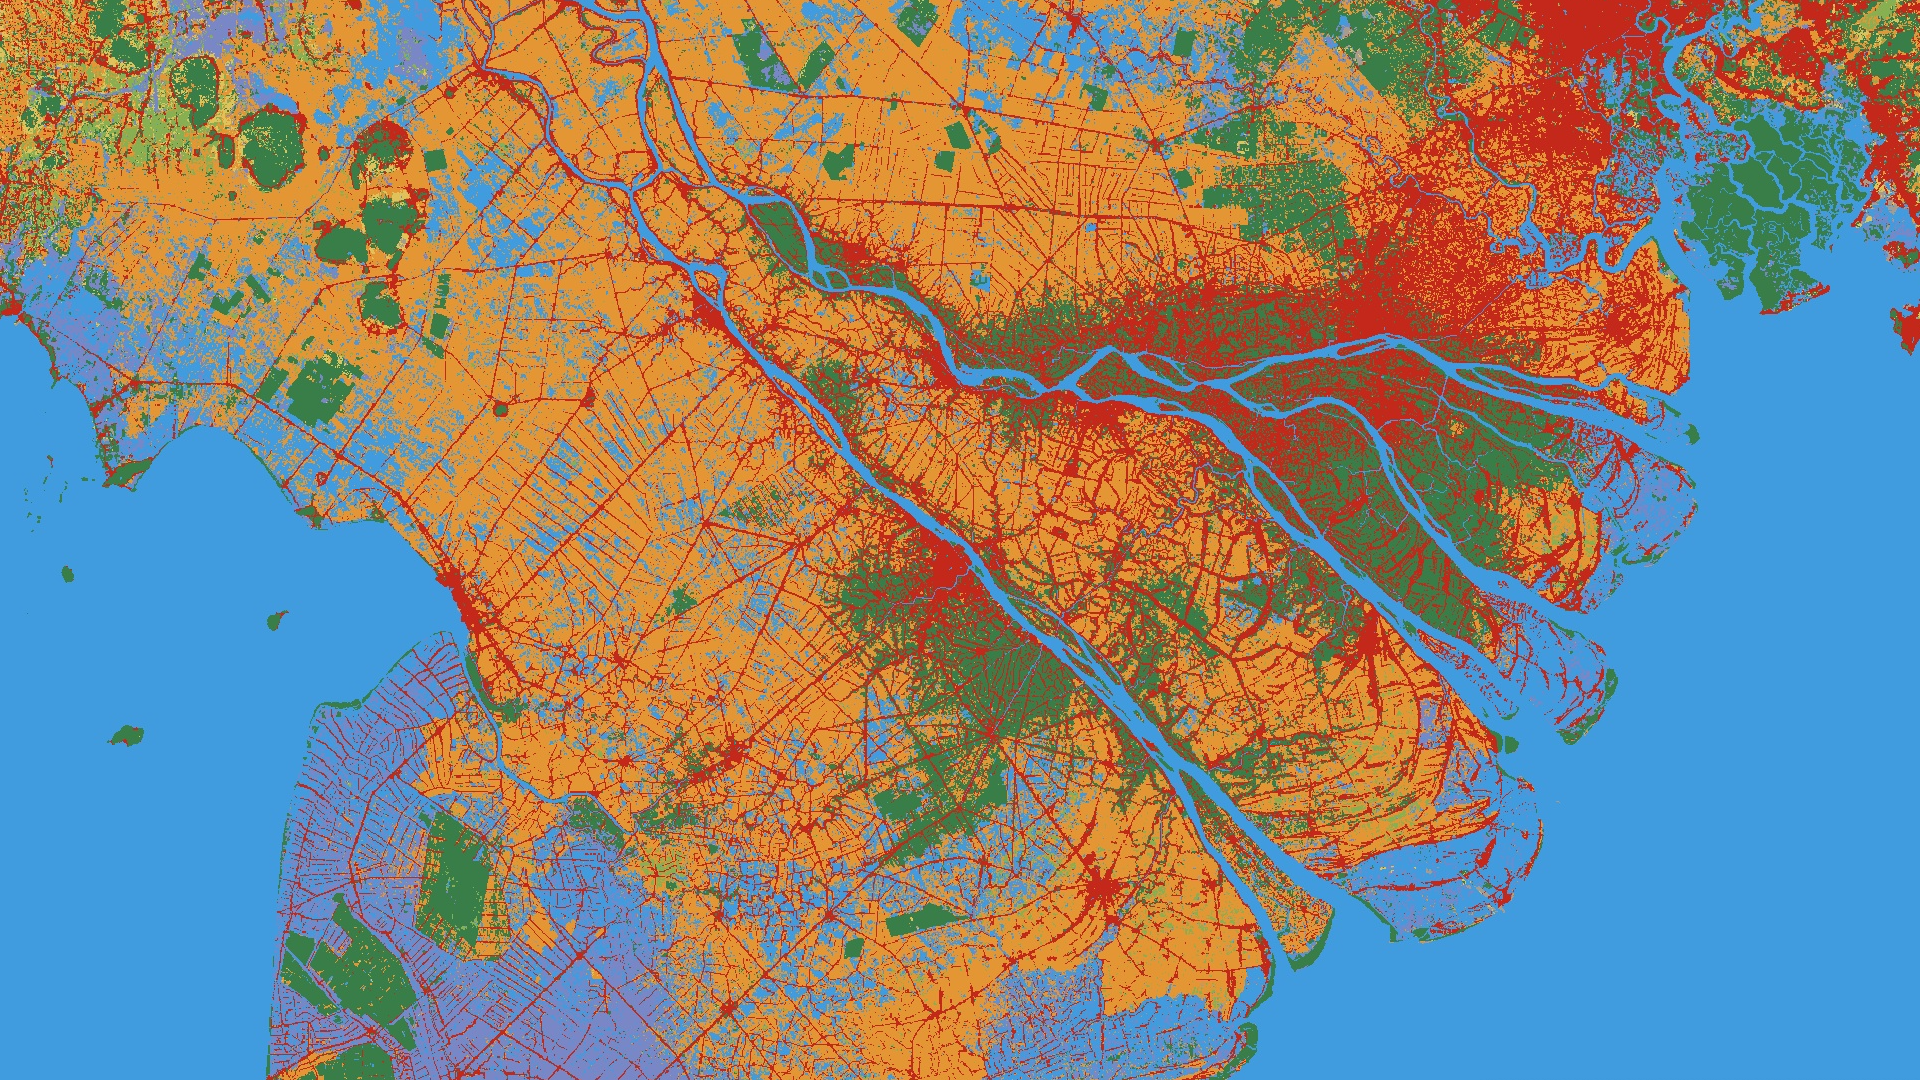 Aerial graphic showing land cover imagery from Dynamic World with different types of land cover for Ho Chi Minh City indicated by red, orange, yellow, blue, green and purple.